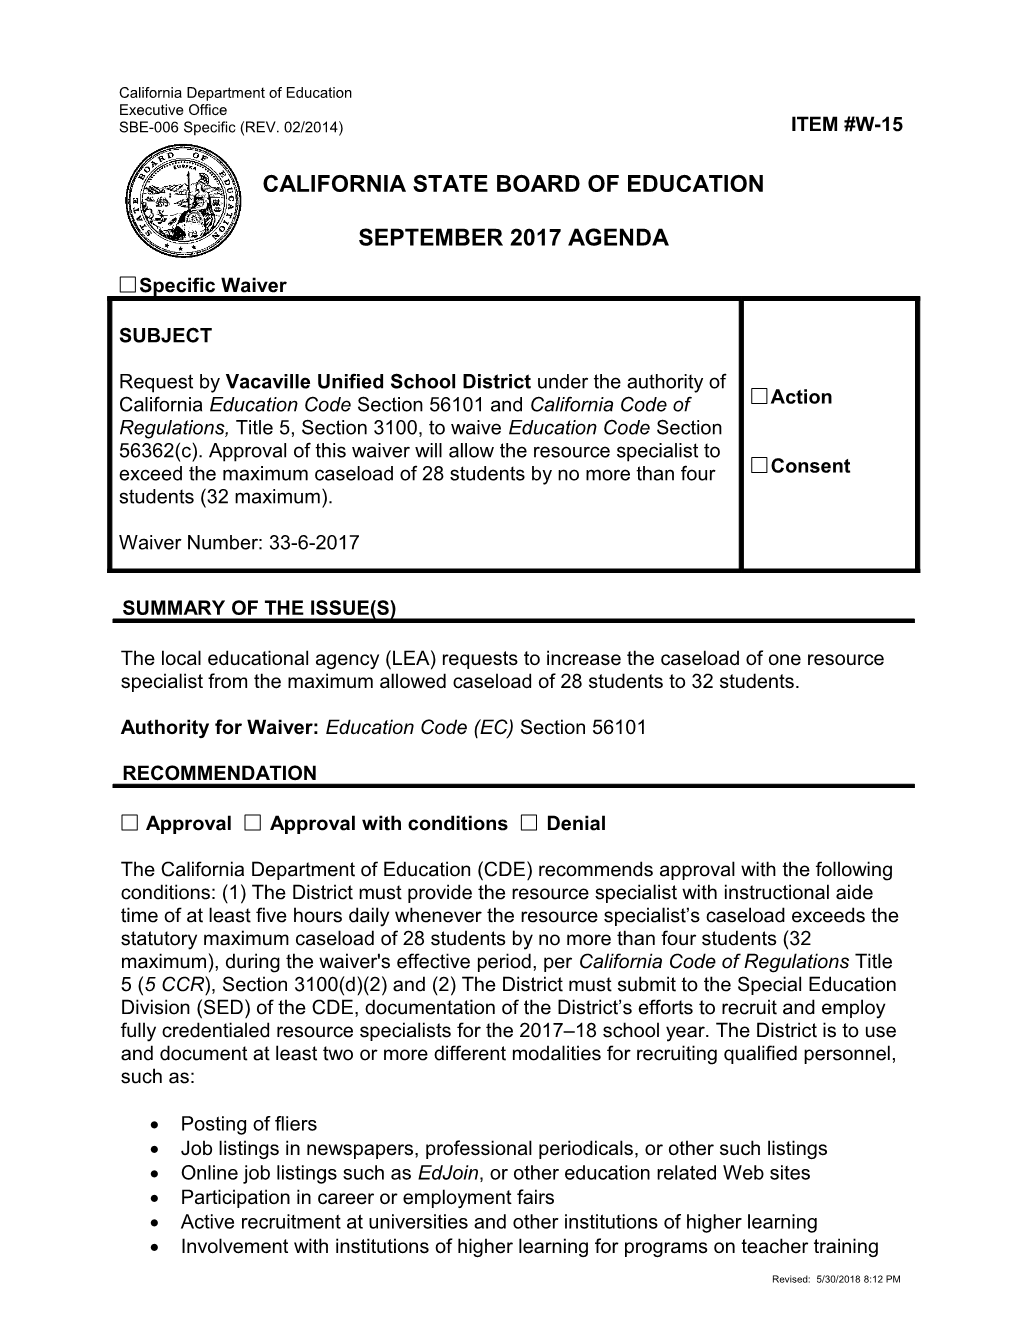 September 2017 Waiver Item W-15 - Meeting Agendas (CA State Board of Education)